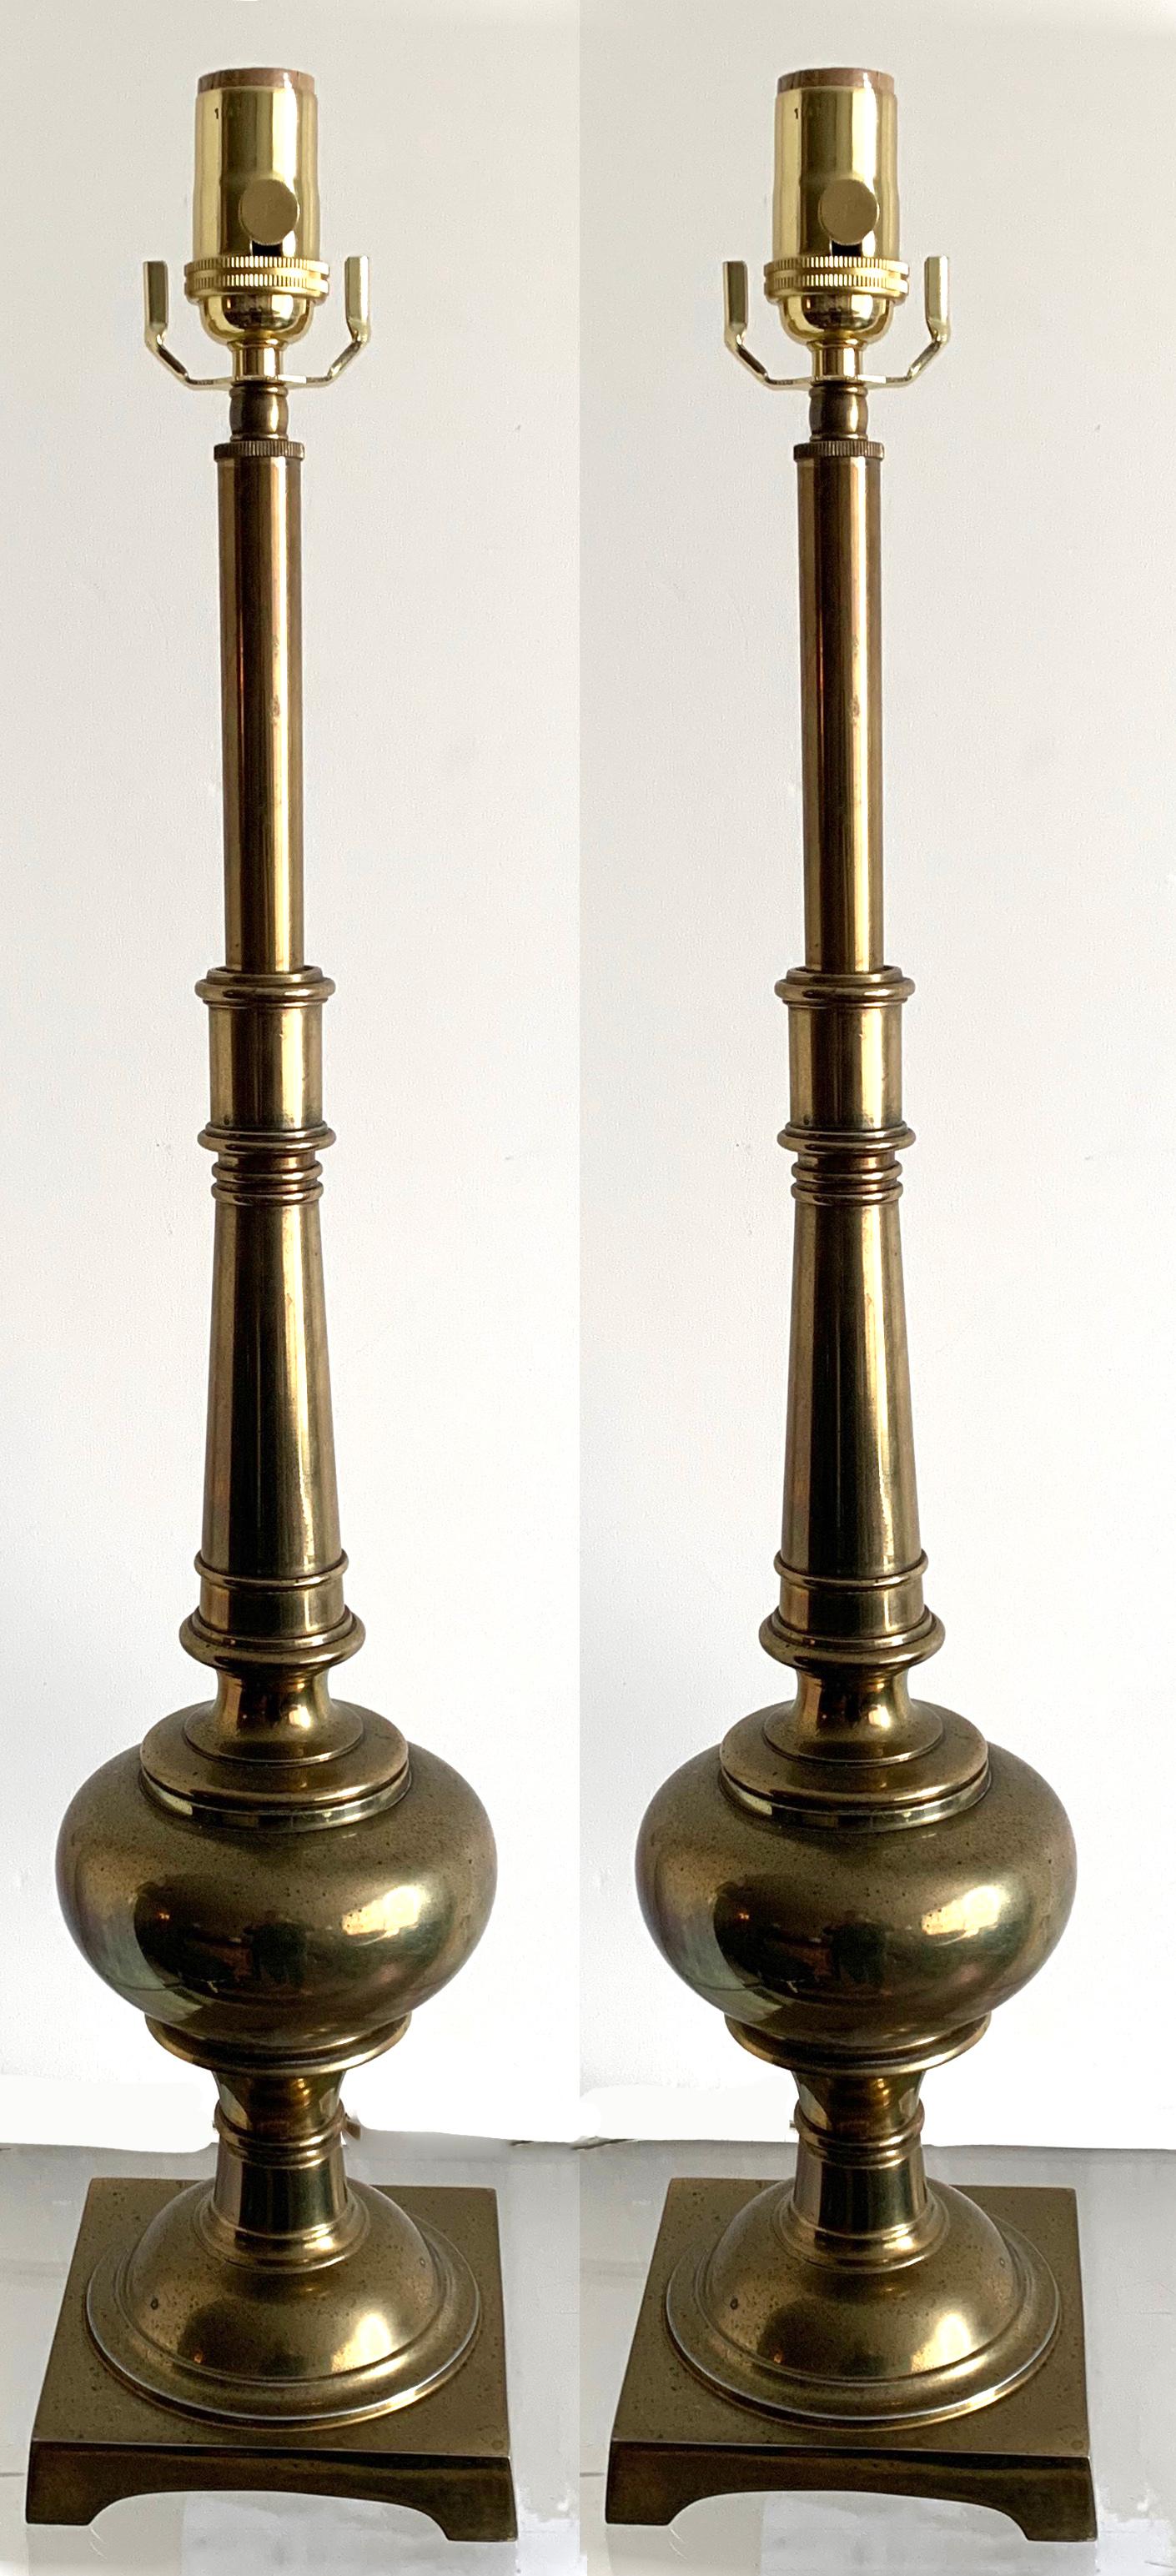 Pair of 1970s tall heavy brass lamps by Stiffel. Newly rewired with new brass sockets. Overall unpolished patina. Each lamps takes one standard bulb (not included). Lampshades are not included.